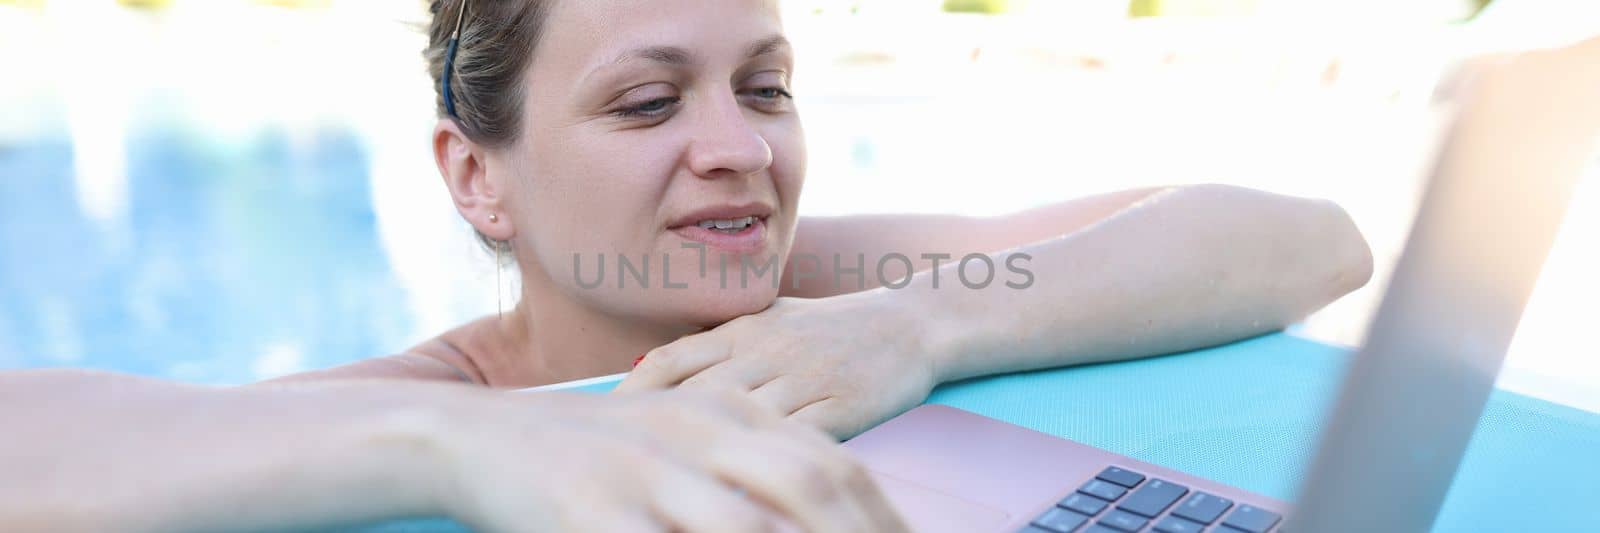 Beautiful woman in pool is typing on laptop by kuprevich